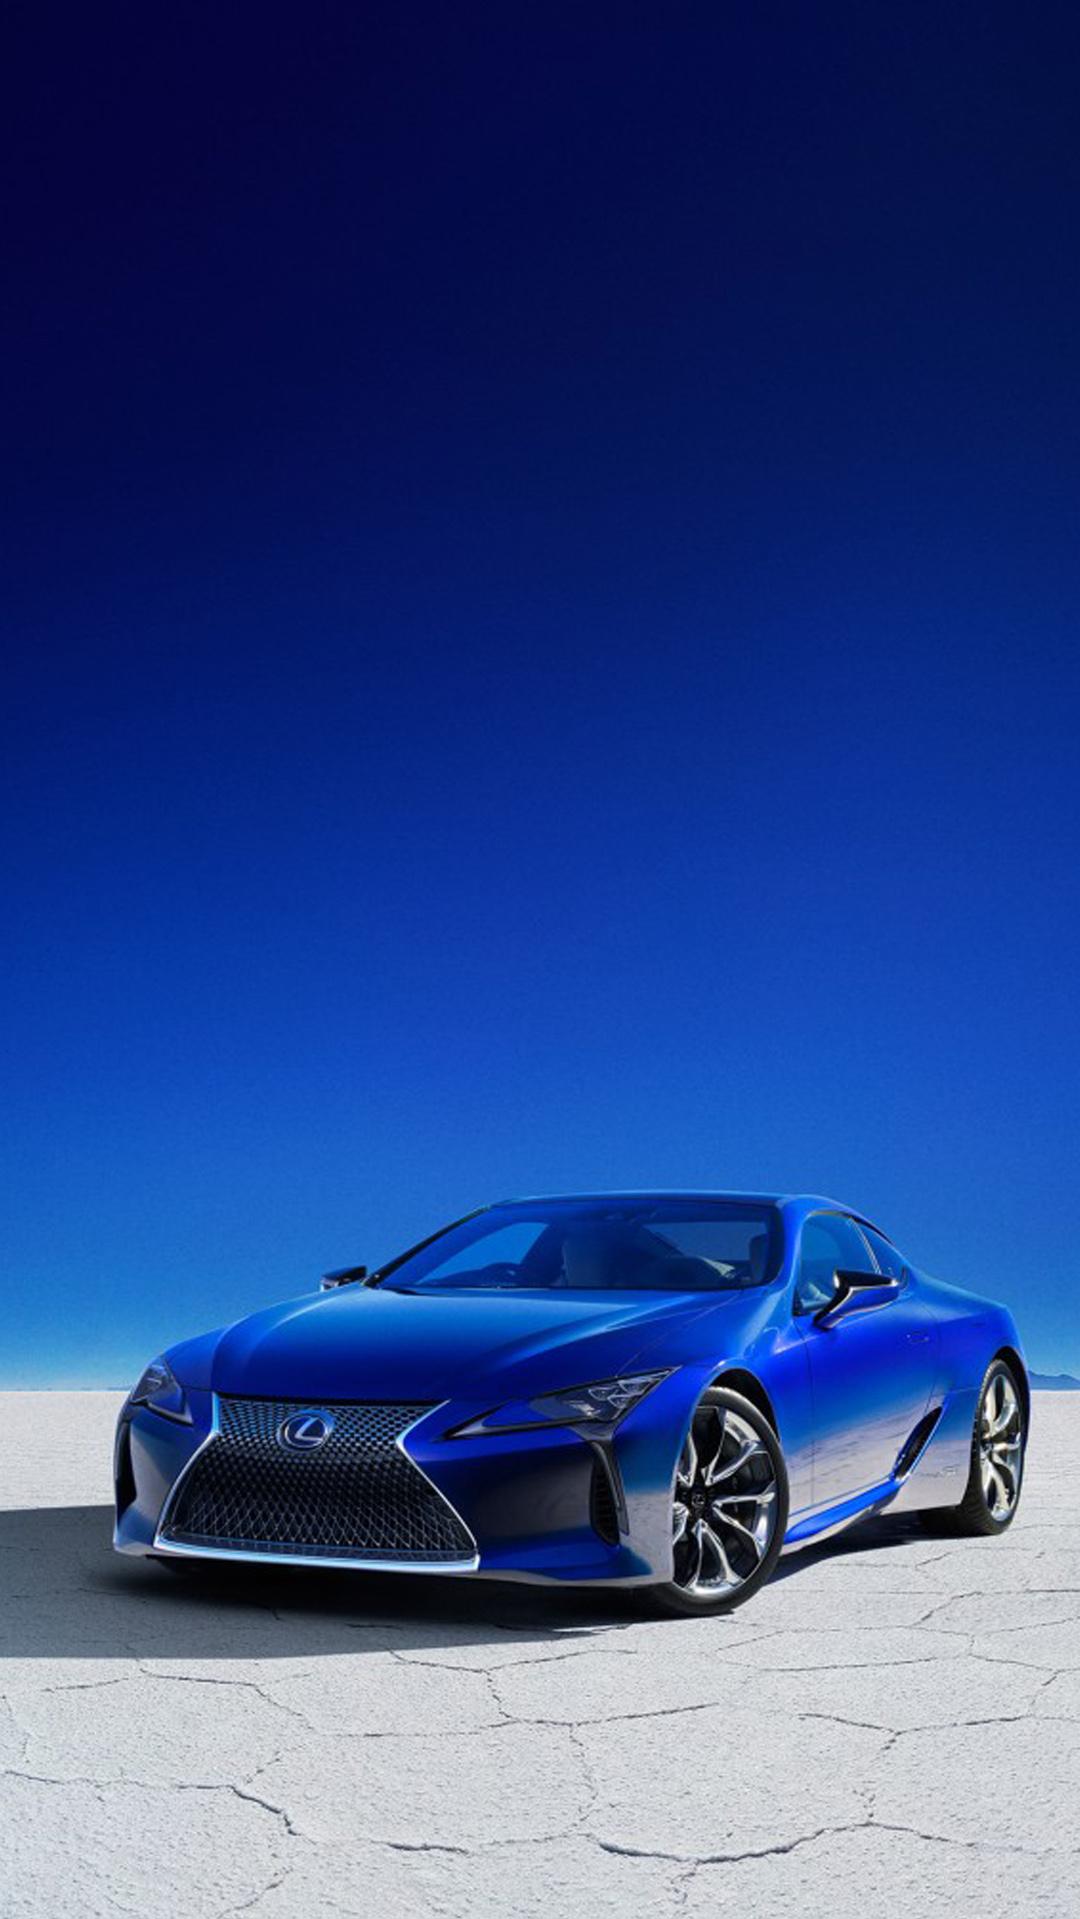 Lexus Lc 500h Structural Blue Edition 4k Ultra HD Mobile Wallpaper